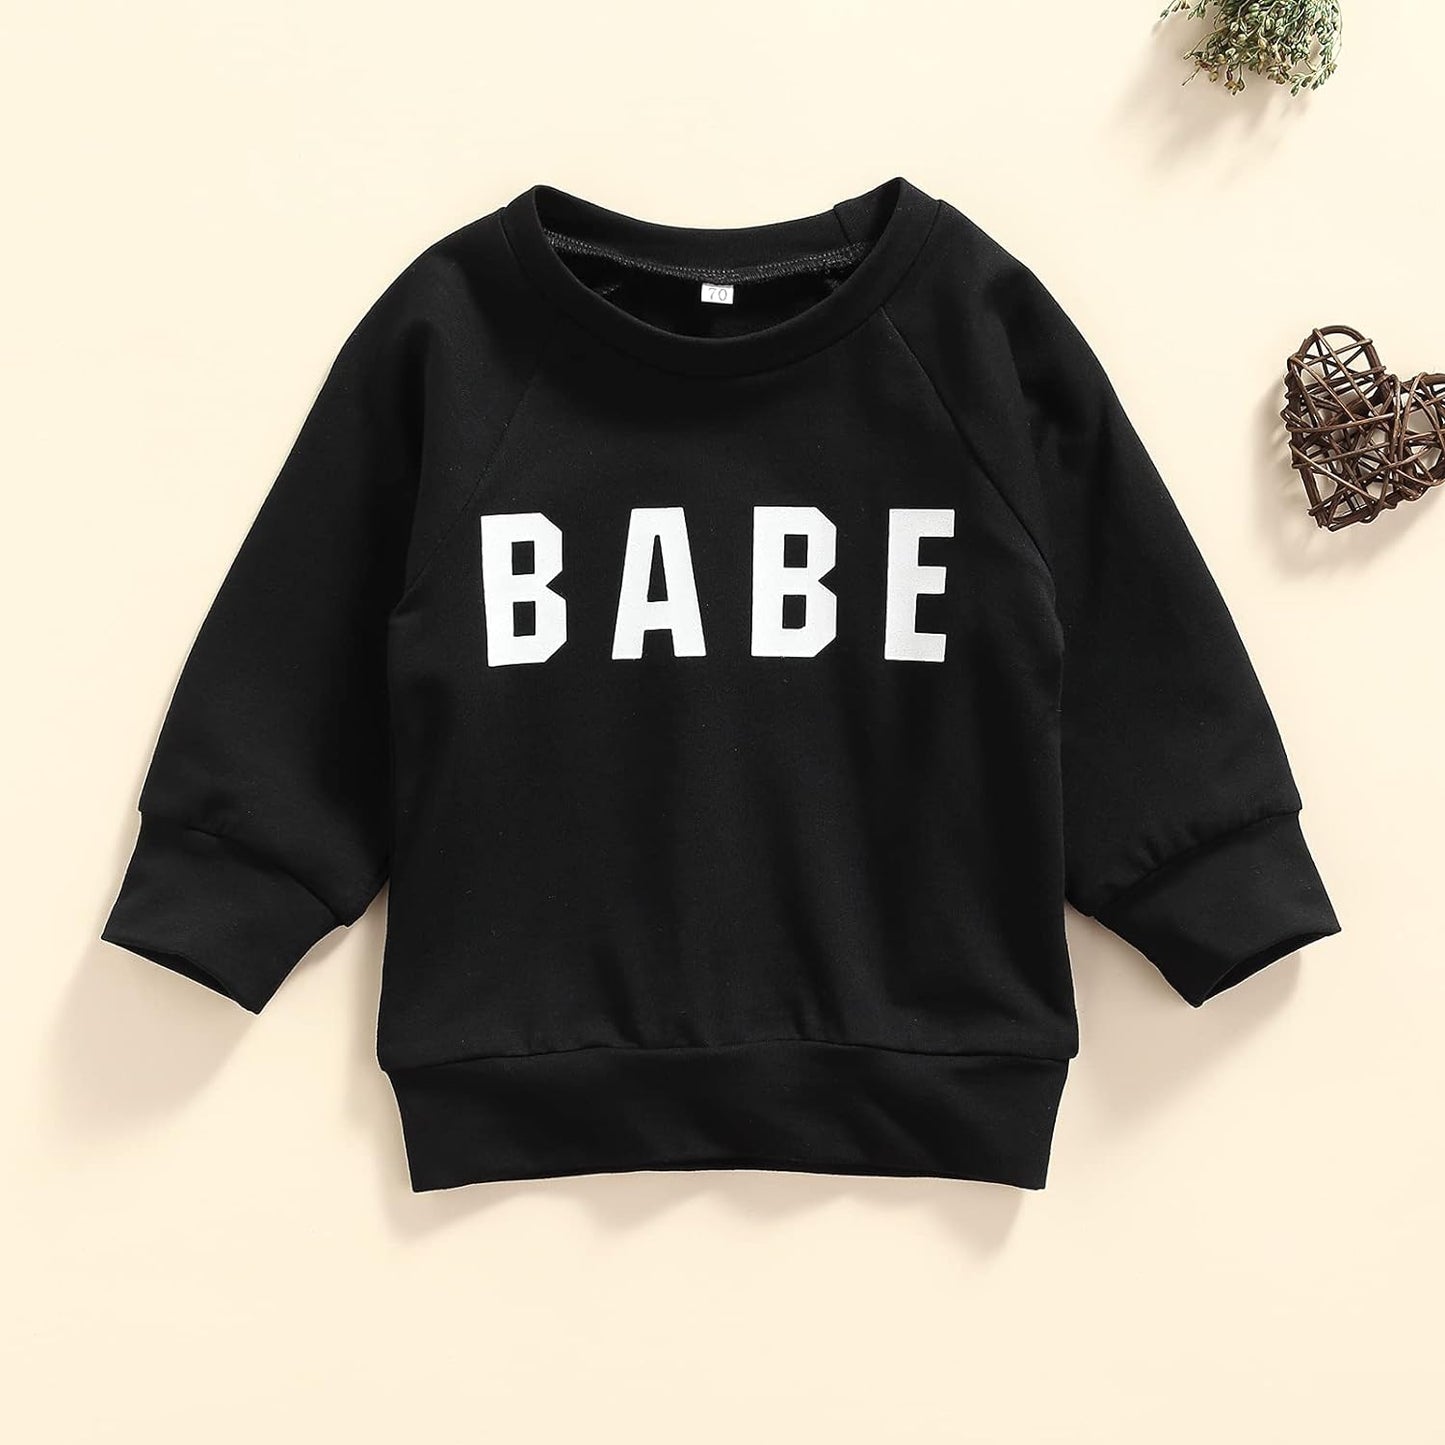 Kids Infant Baby Boy Girls Clothes Babe Letter Printed Long Sleeve Pullover Sweatshirt Shirt Sweater Tops